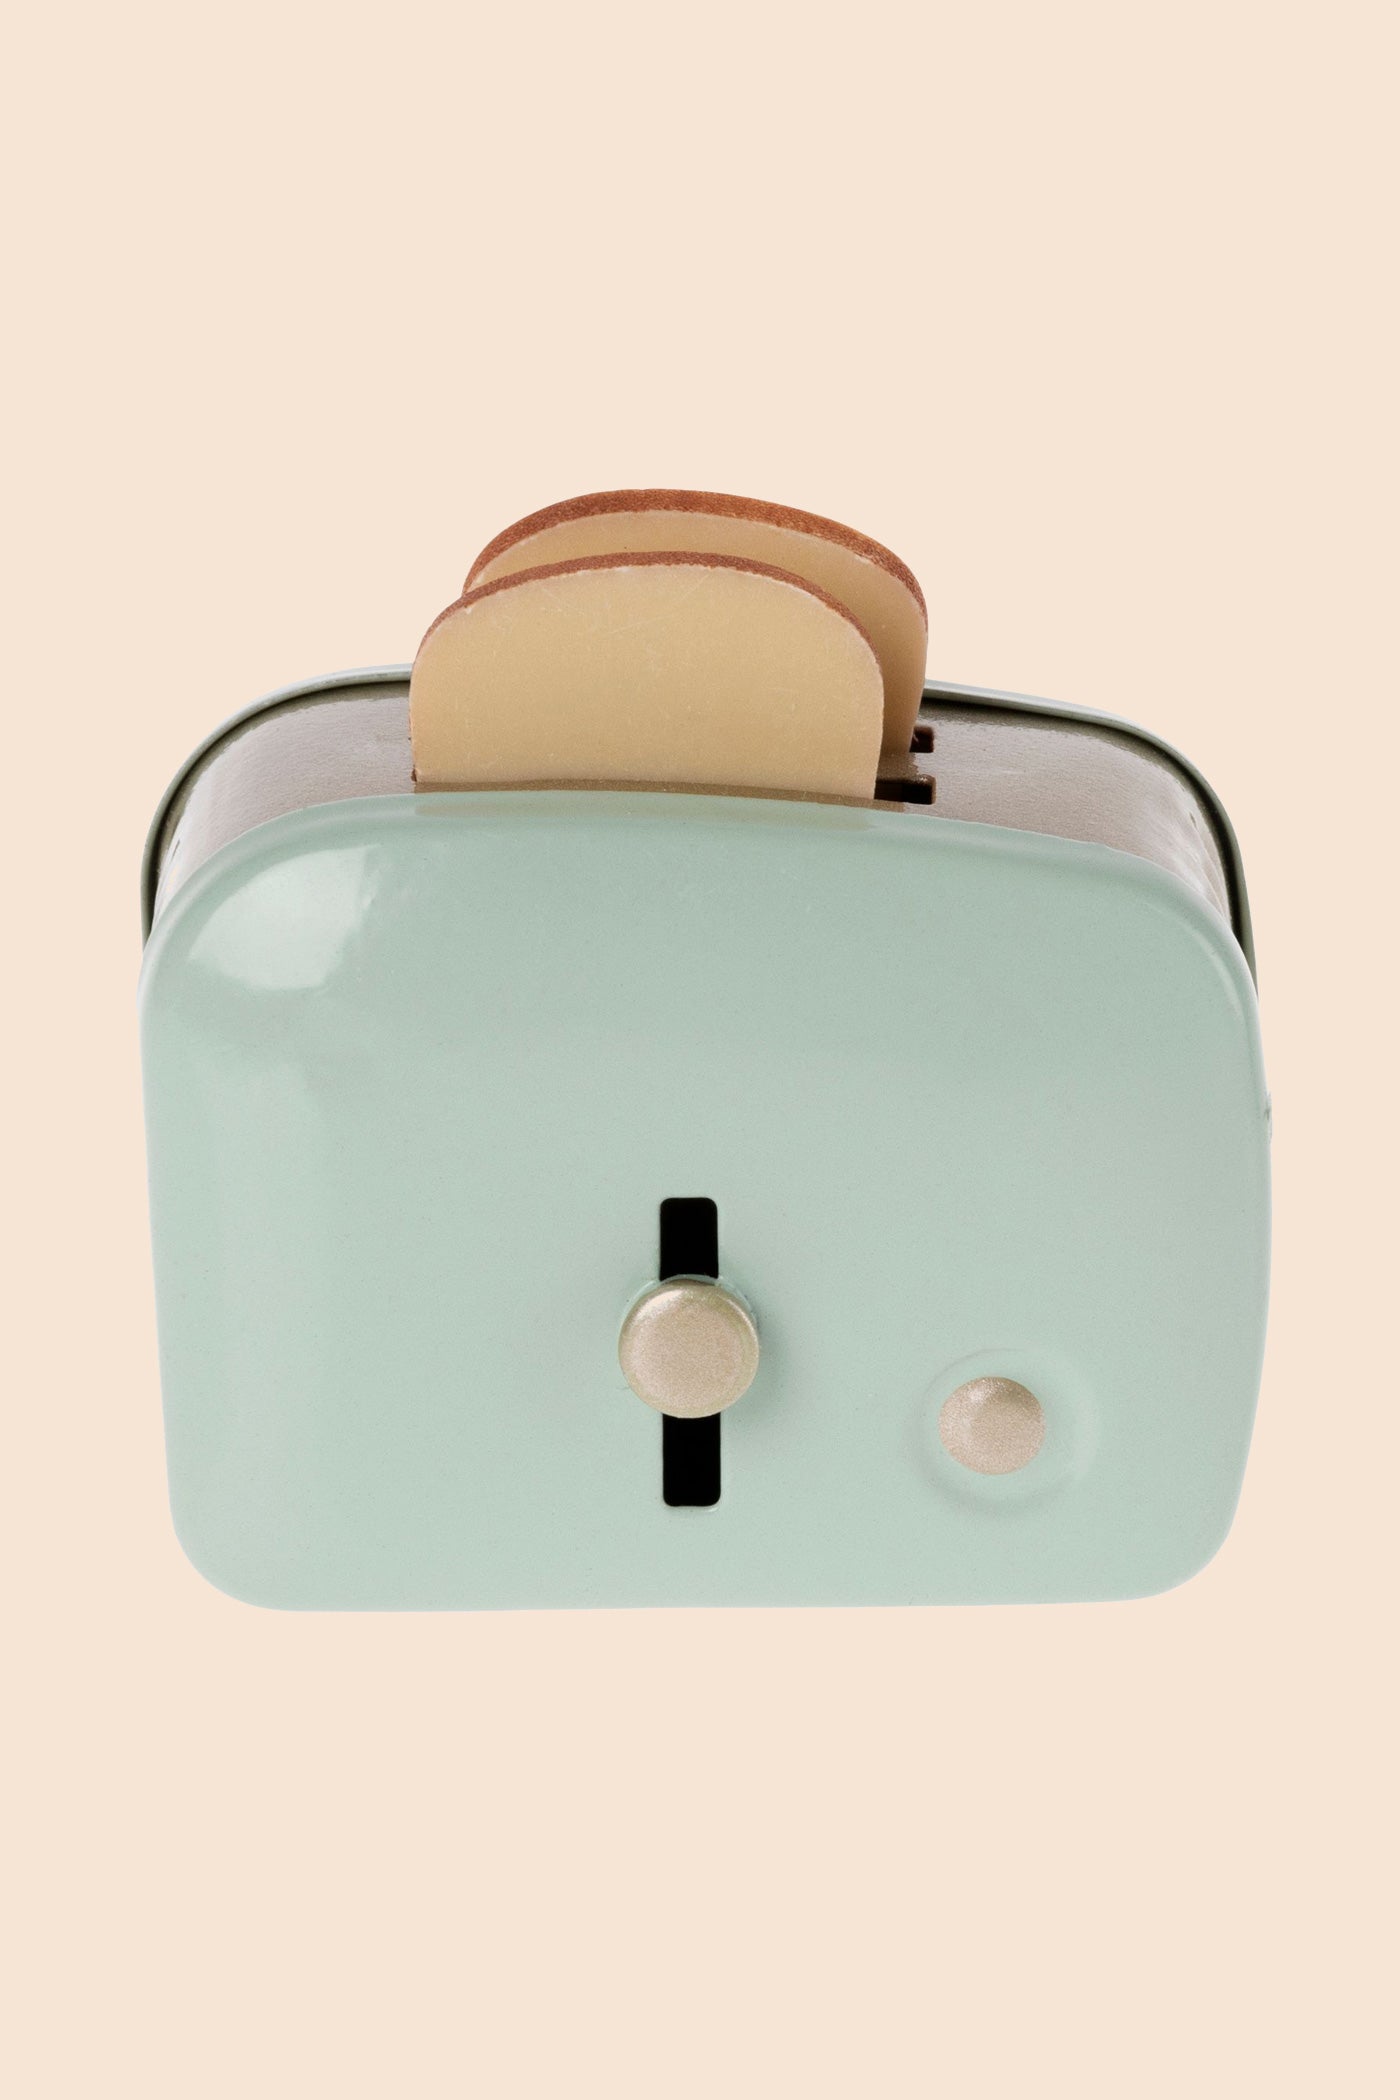 Maileg Miniature Toaster with bread-Mint